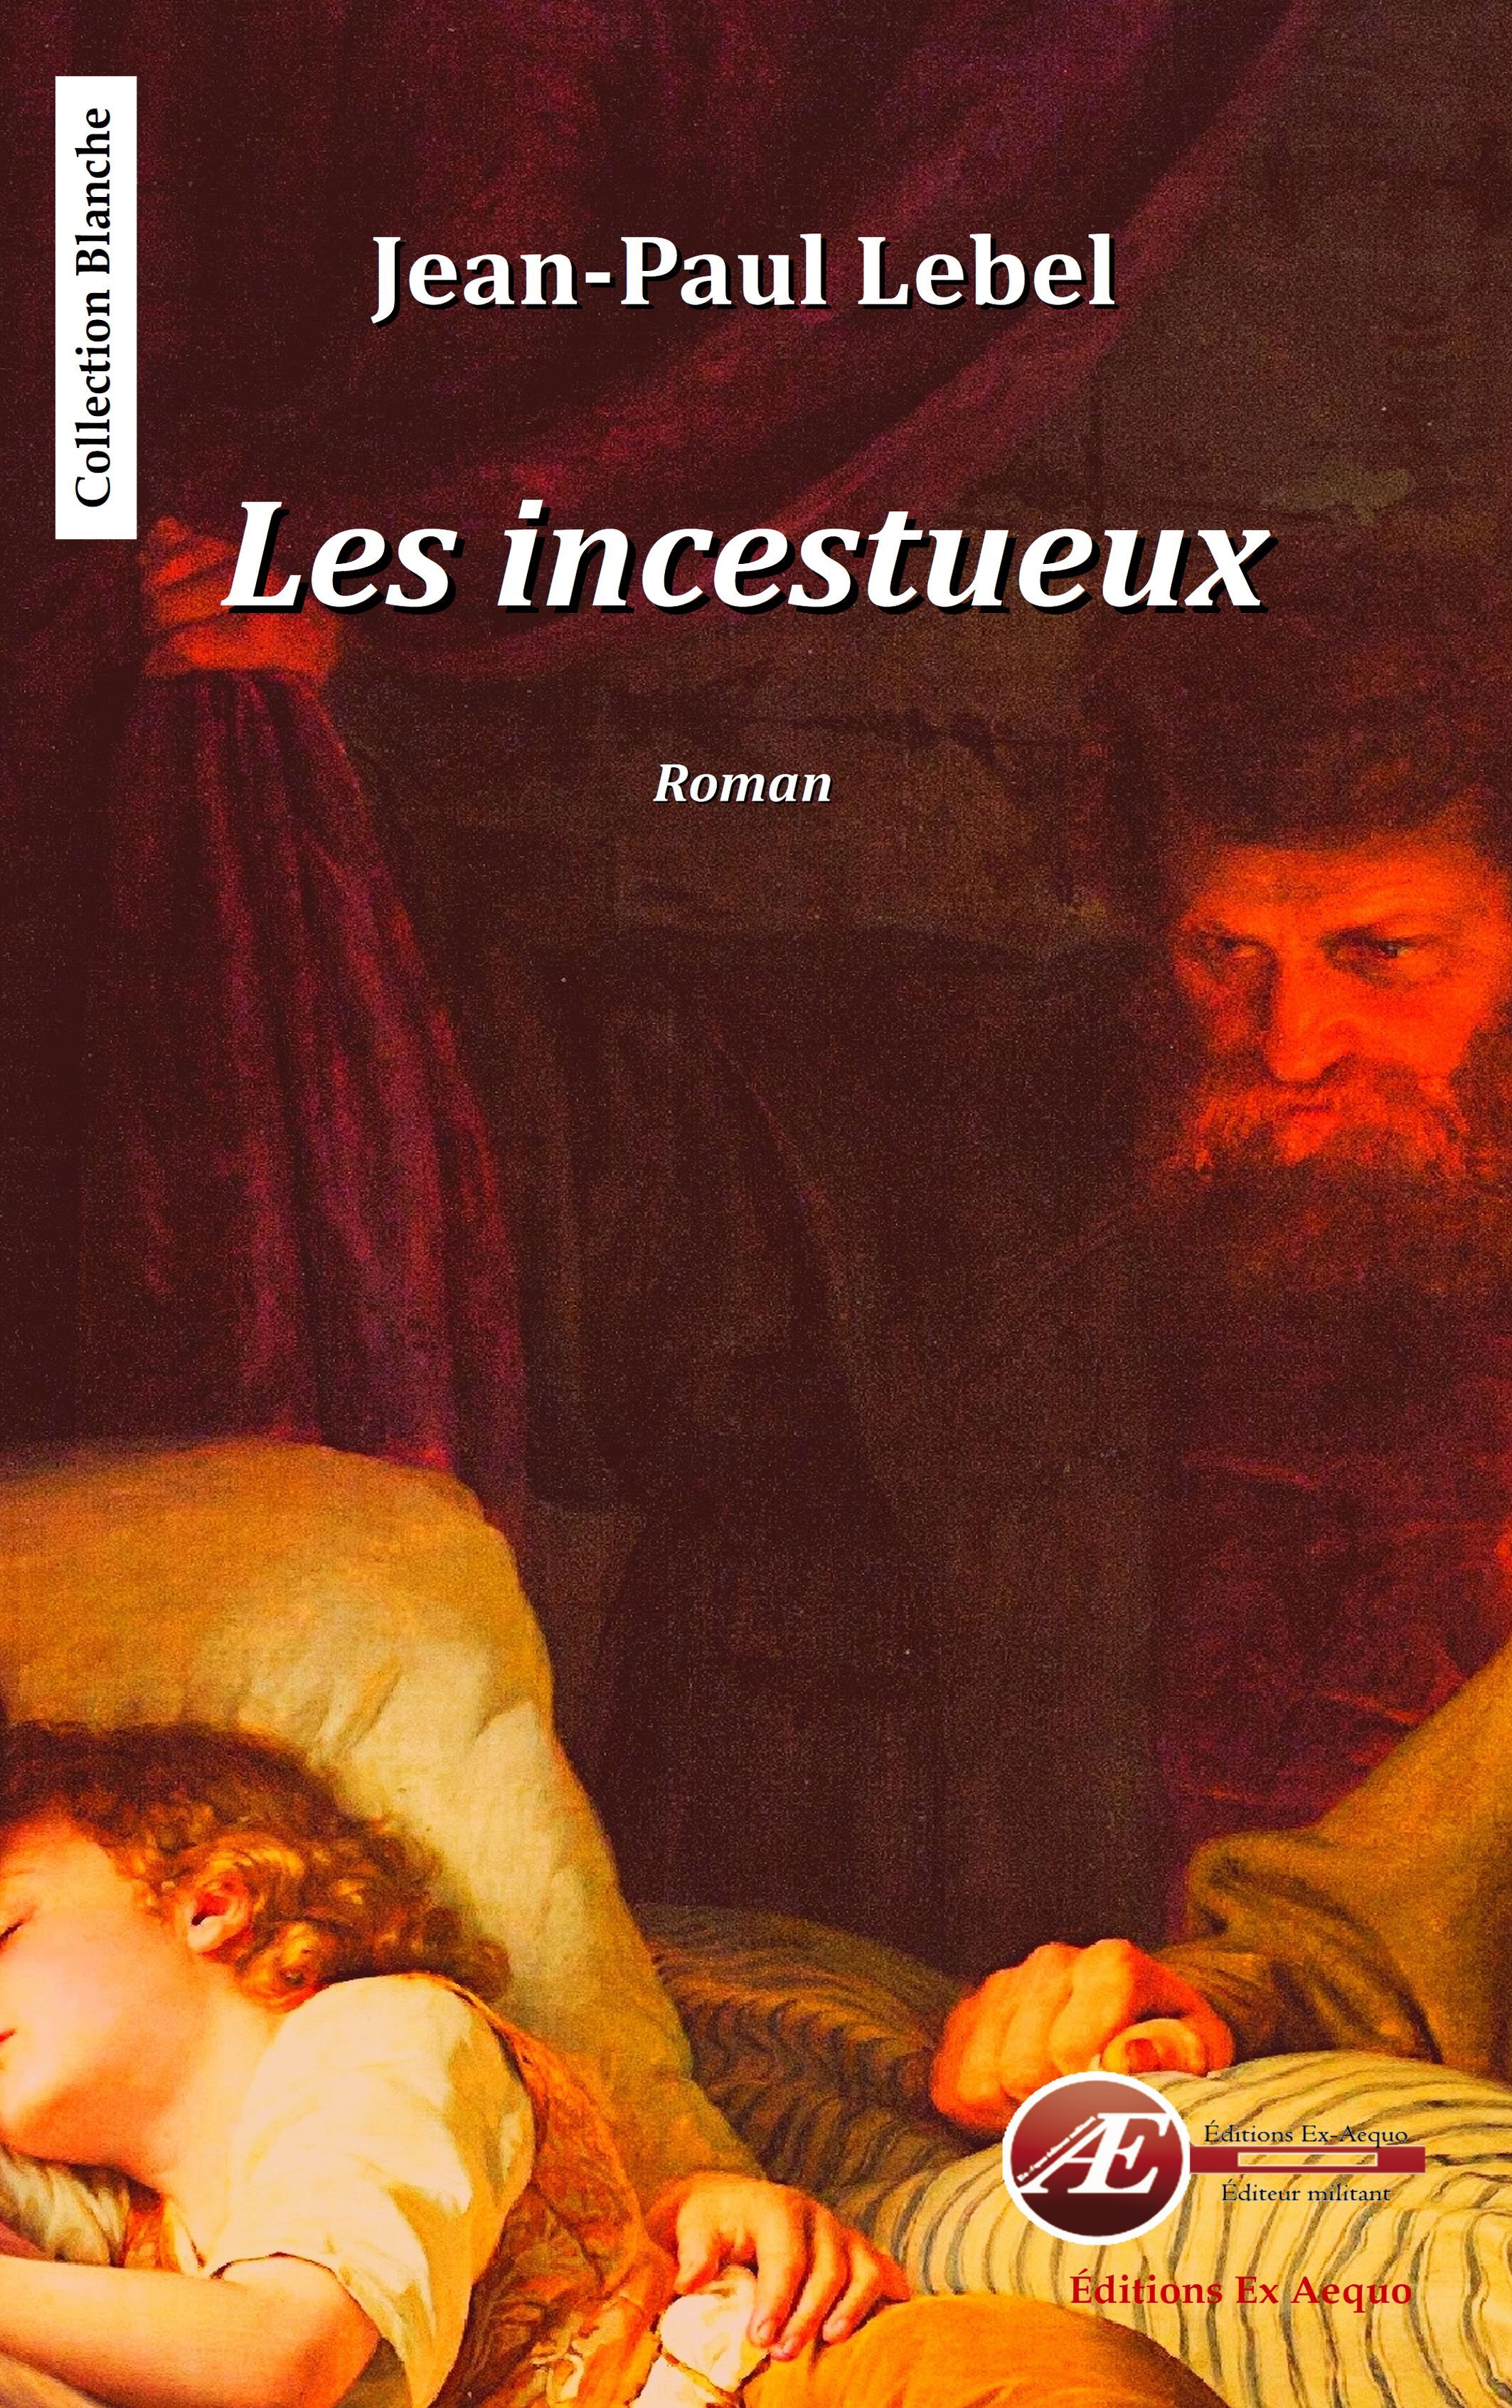 You are currently viewing Les incestueux, de Jean-Paul Lebel